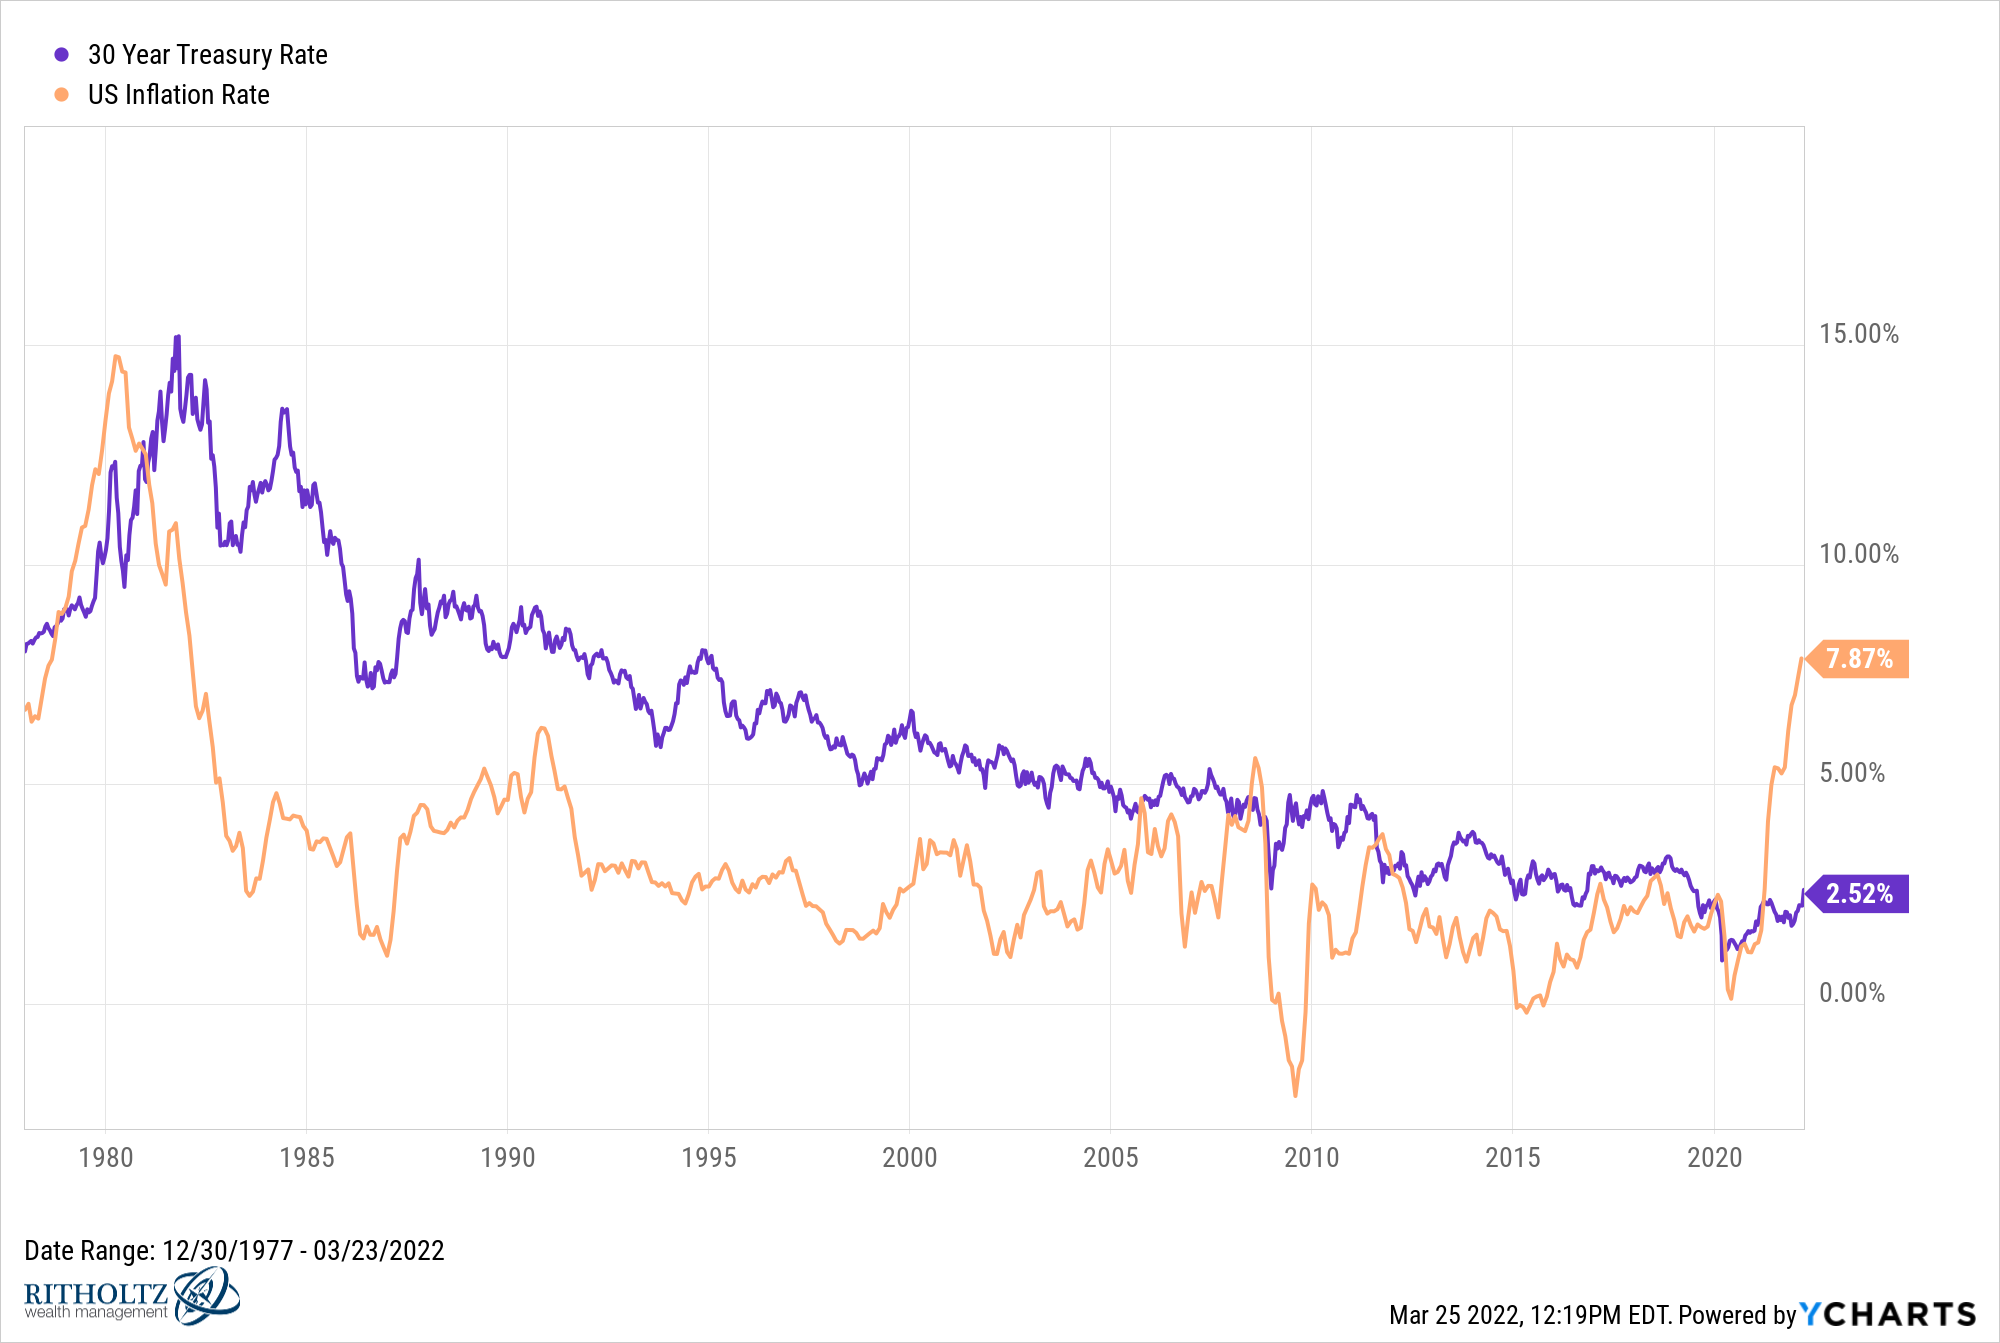 30 Year Treasury Rate compared to US Inflation Rate since 1978